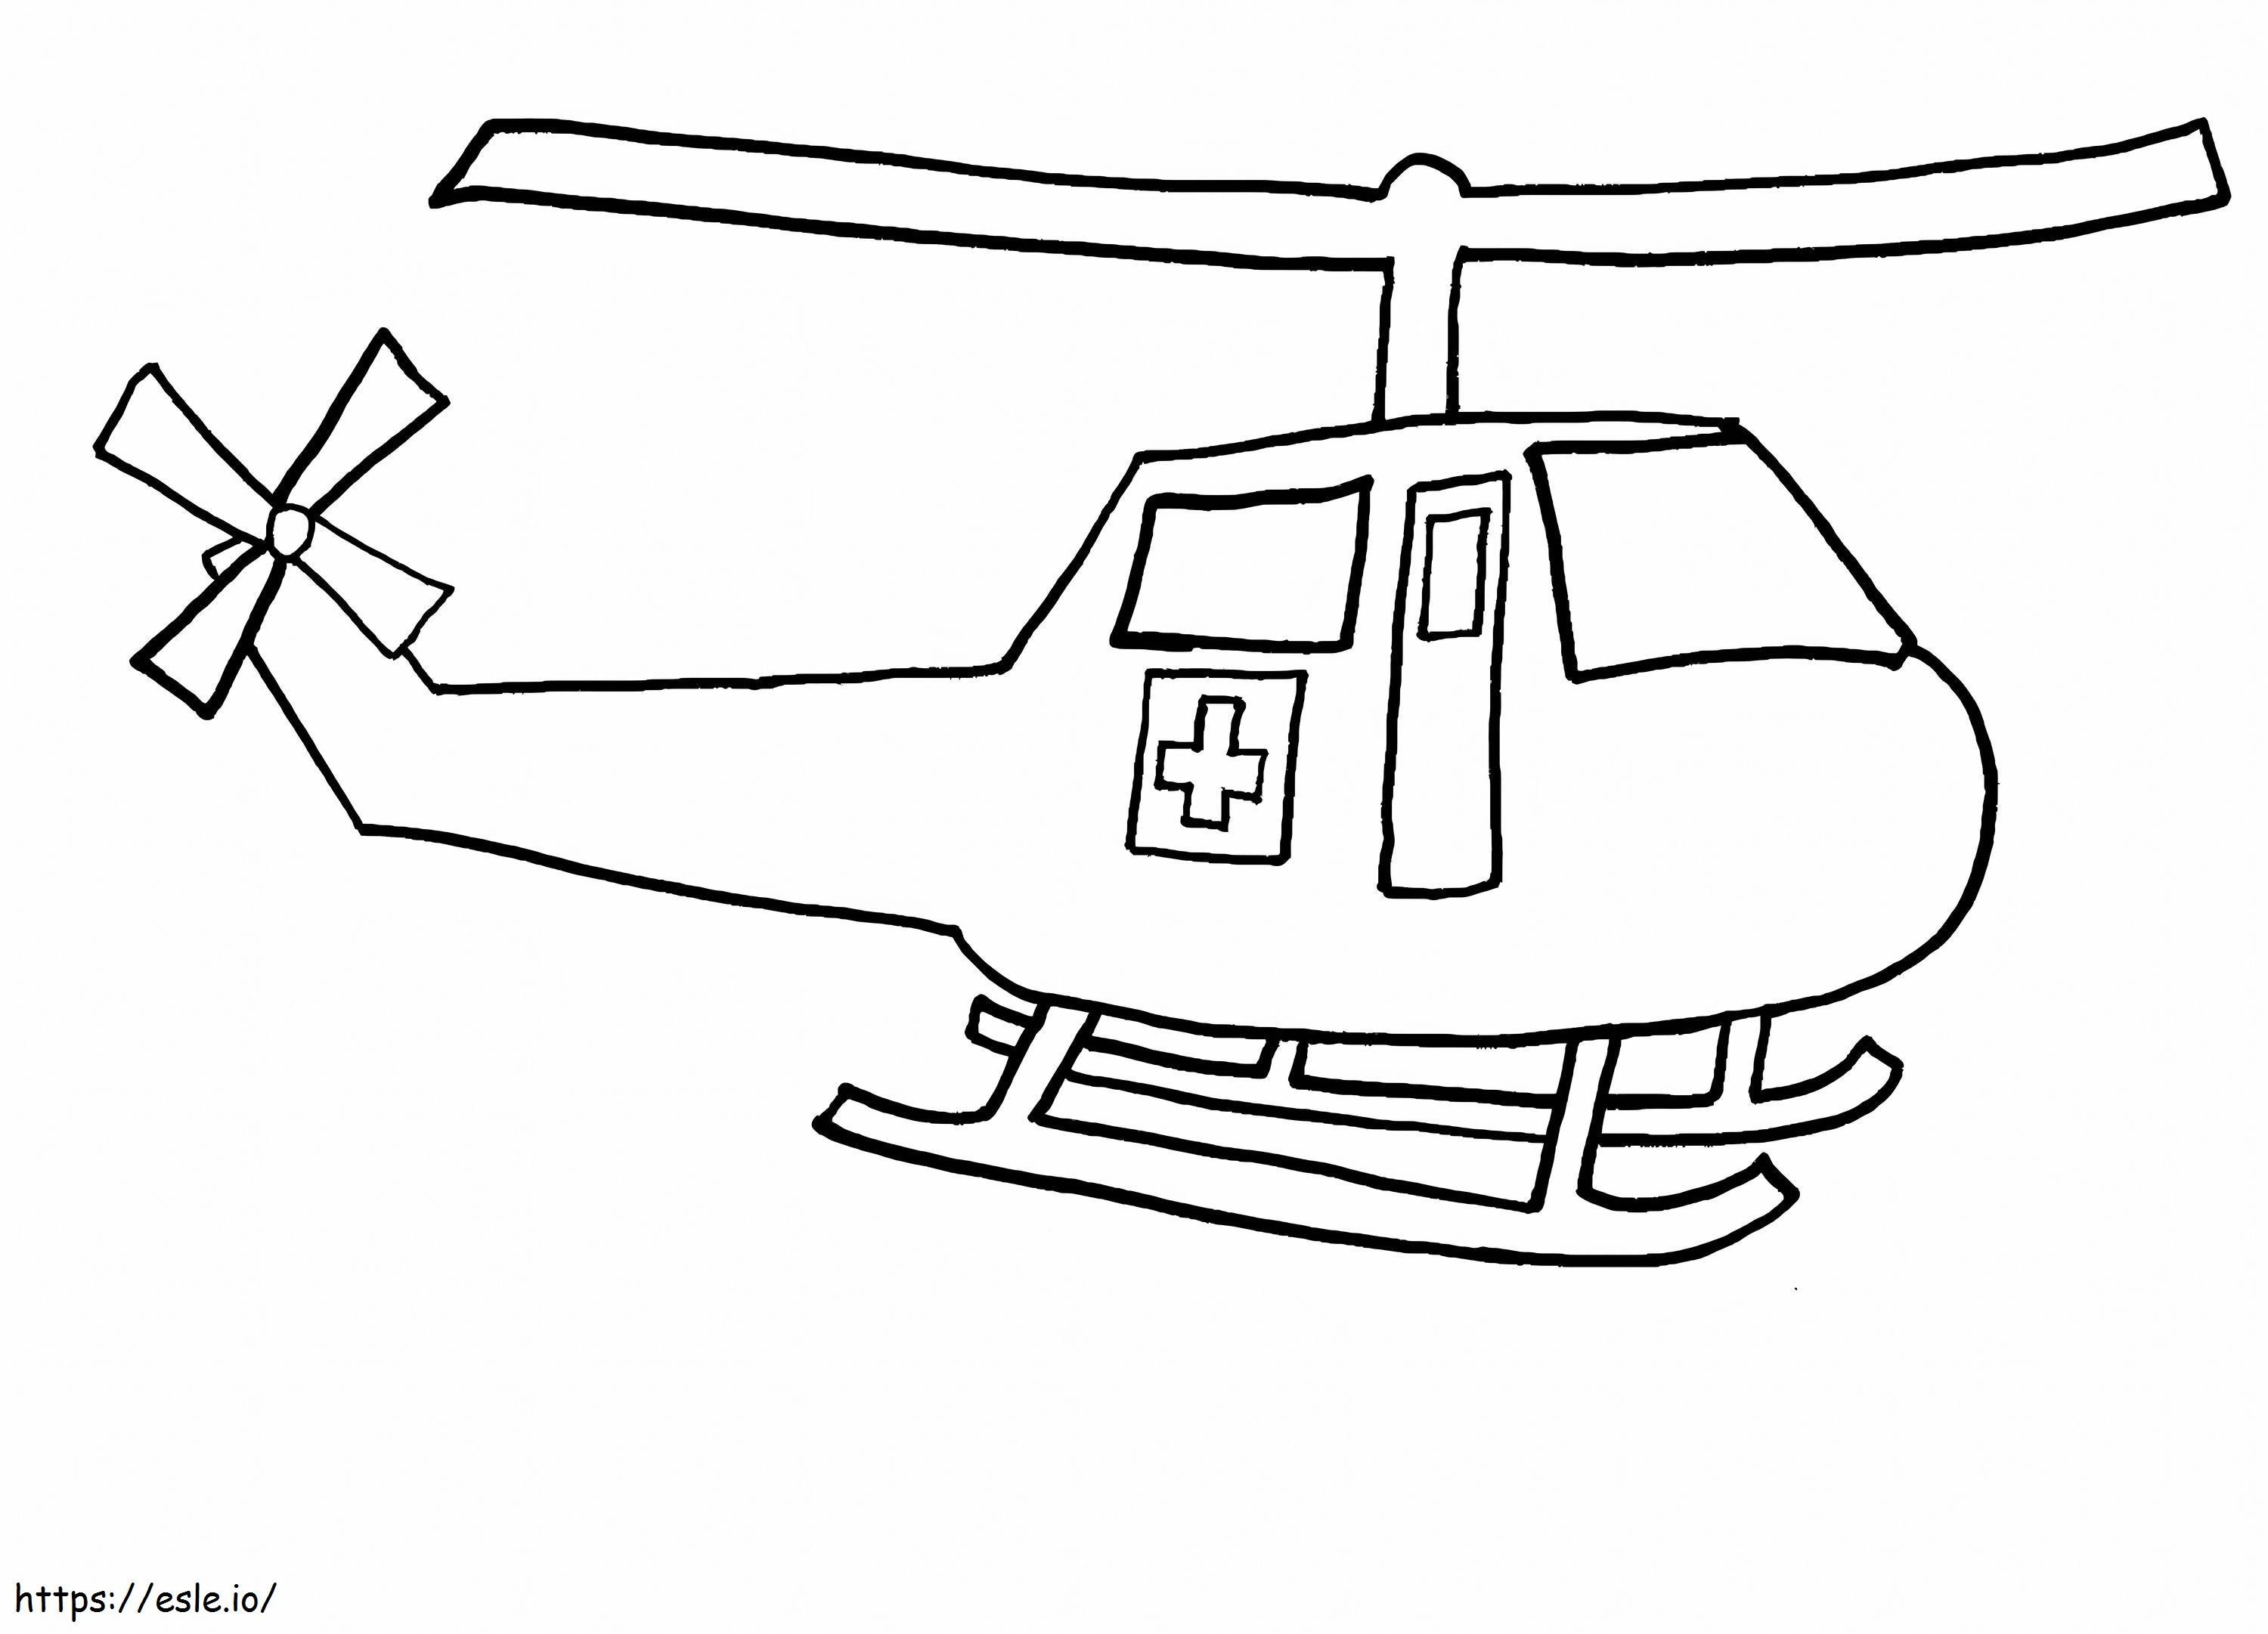 Hospital Helicopter coloring page